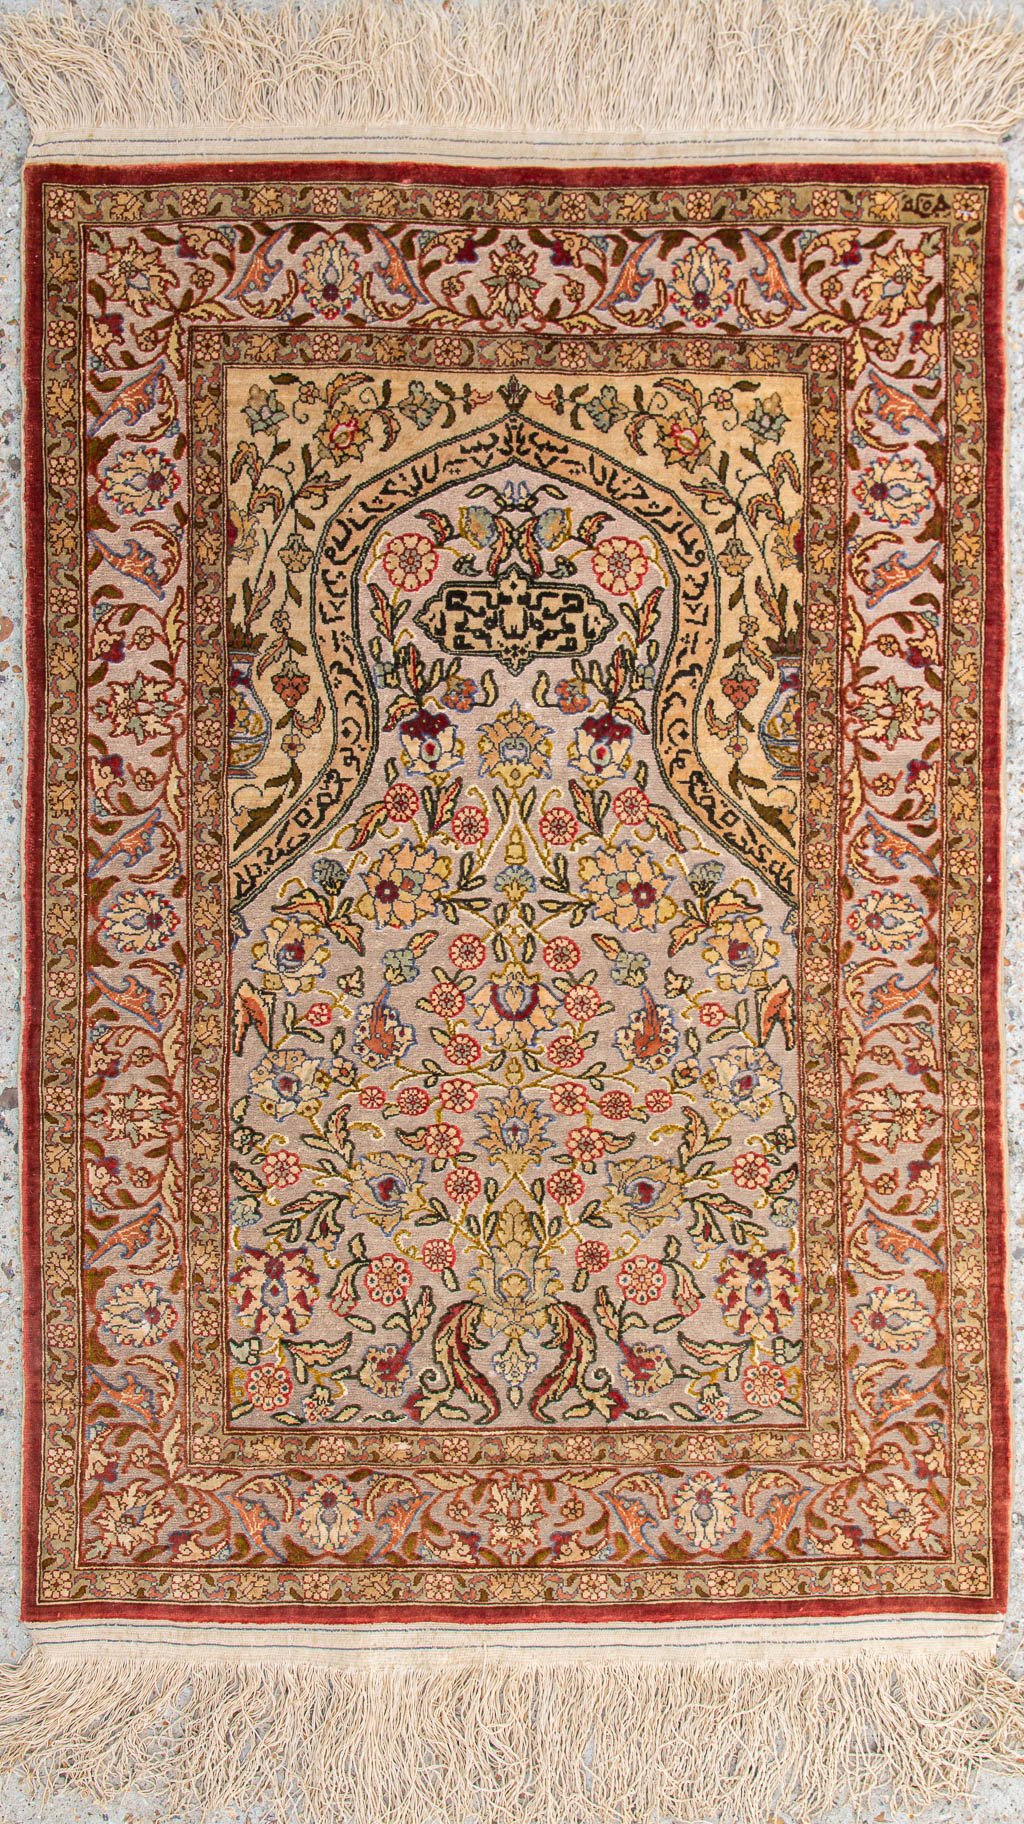 An Oriental hand-made prayer carpet made of silk and finished with gold thread. (58 x 87 cm)